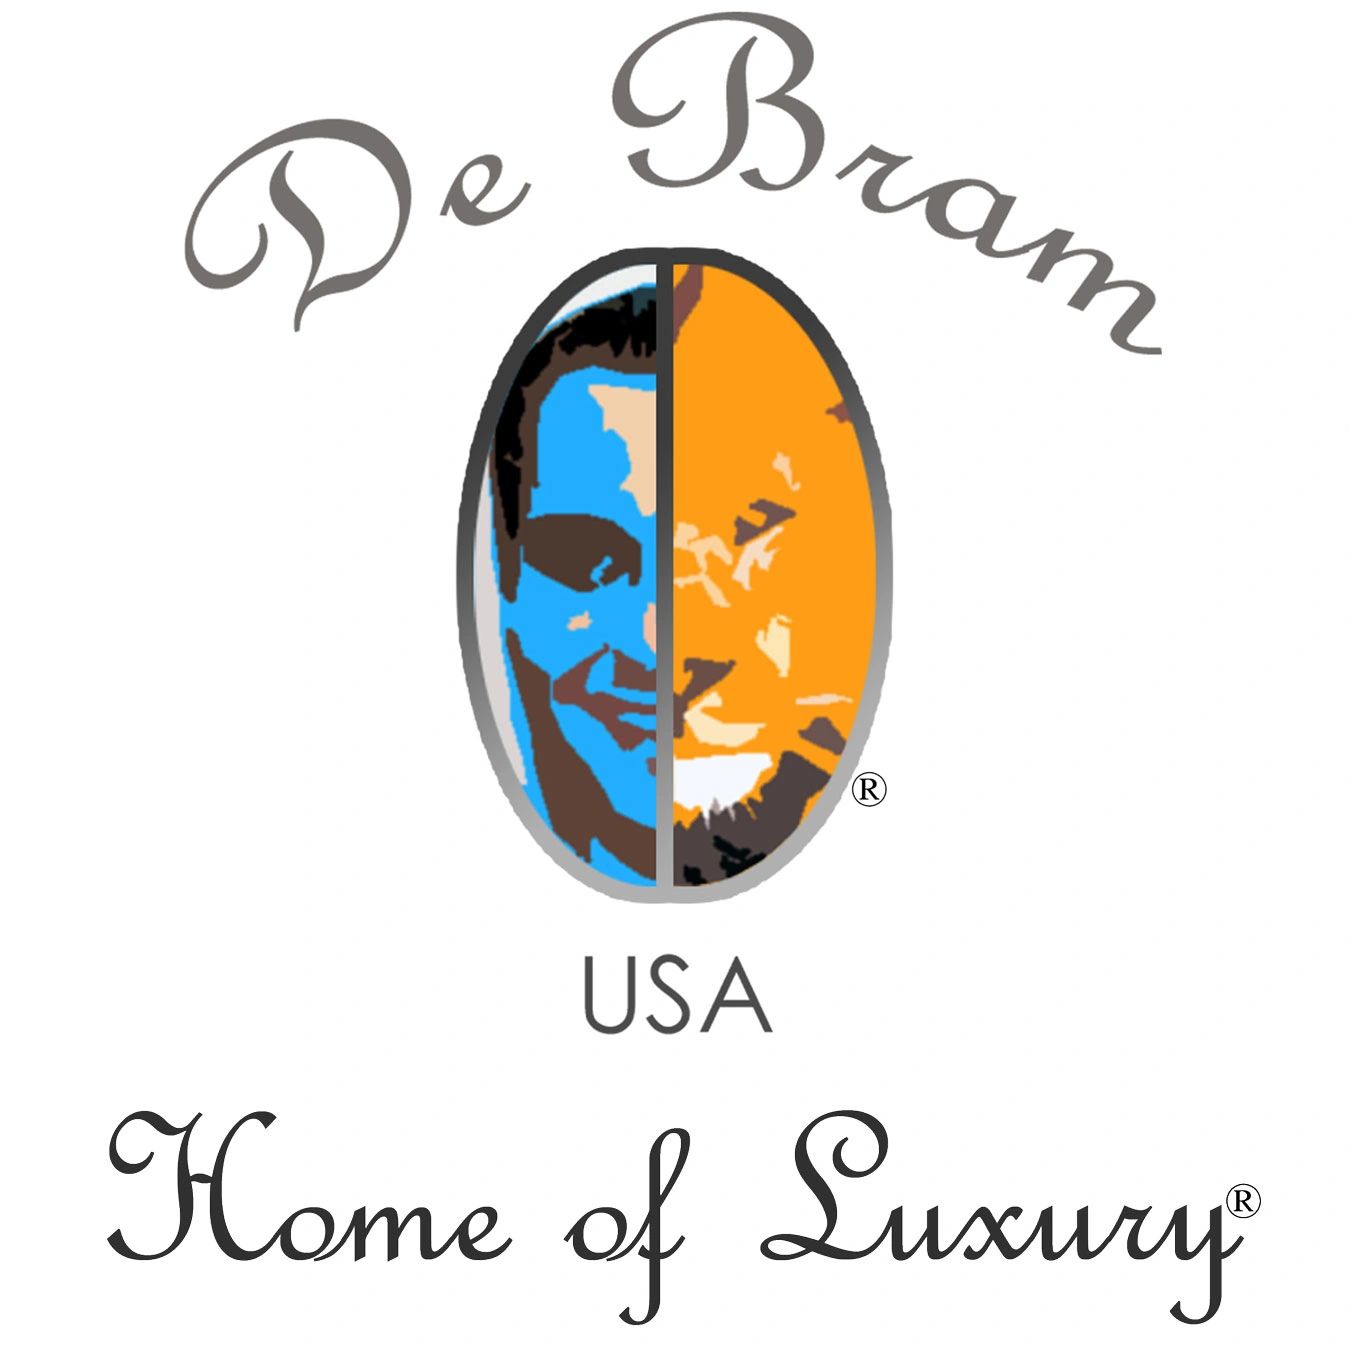 De Bram Company Logo and Trademark and Home of Luxury Logo and Trademark